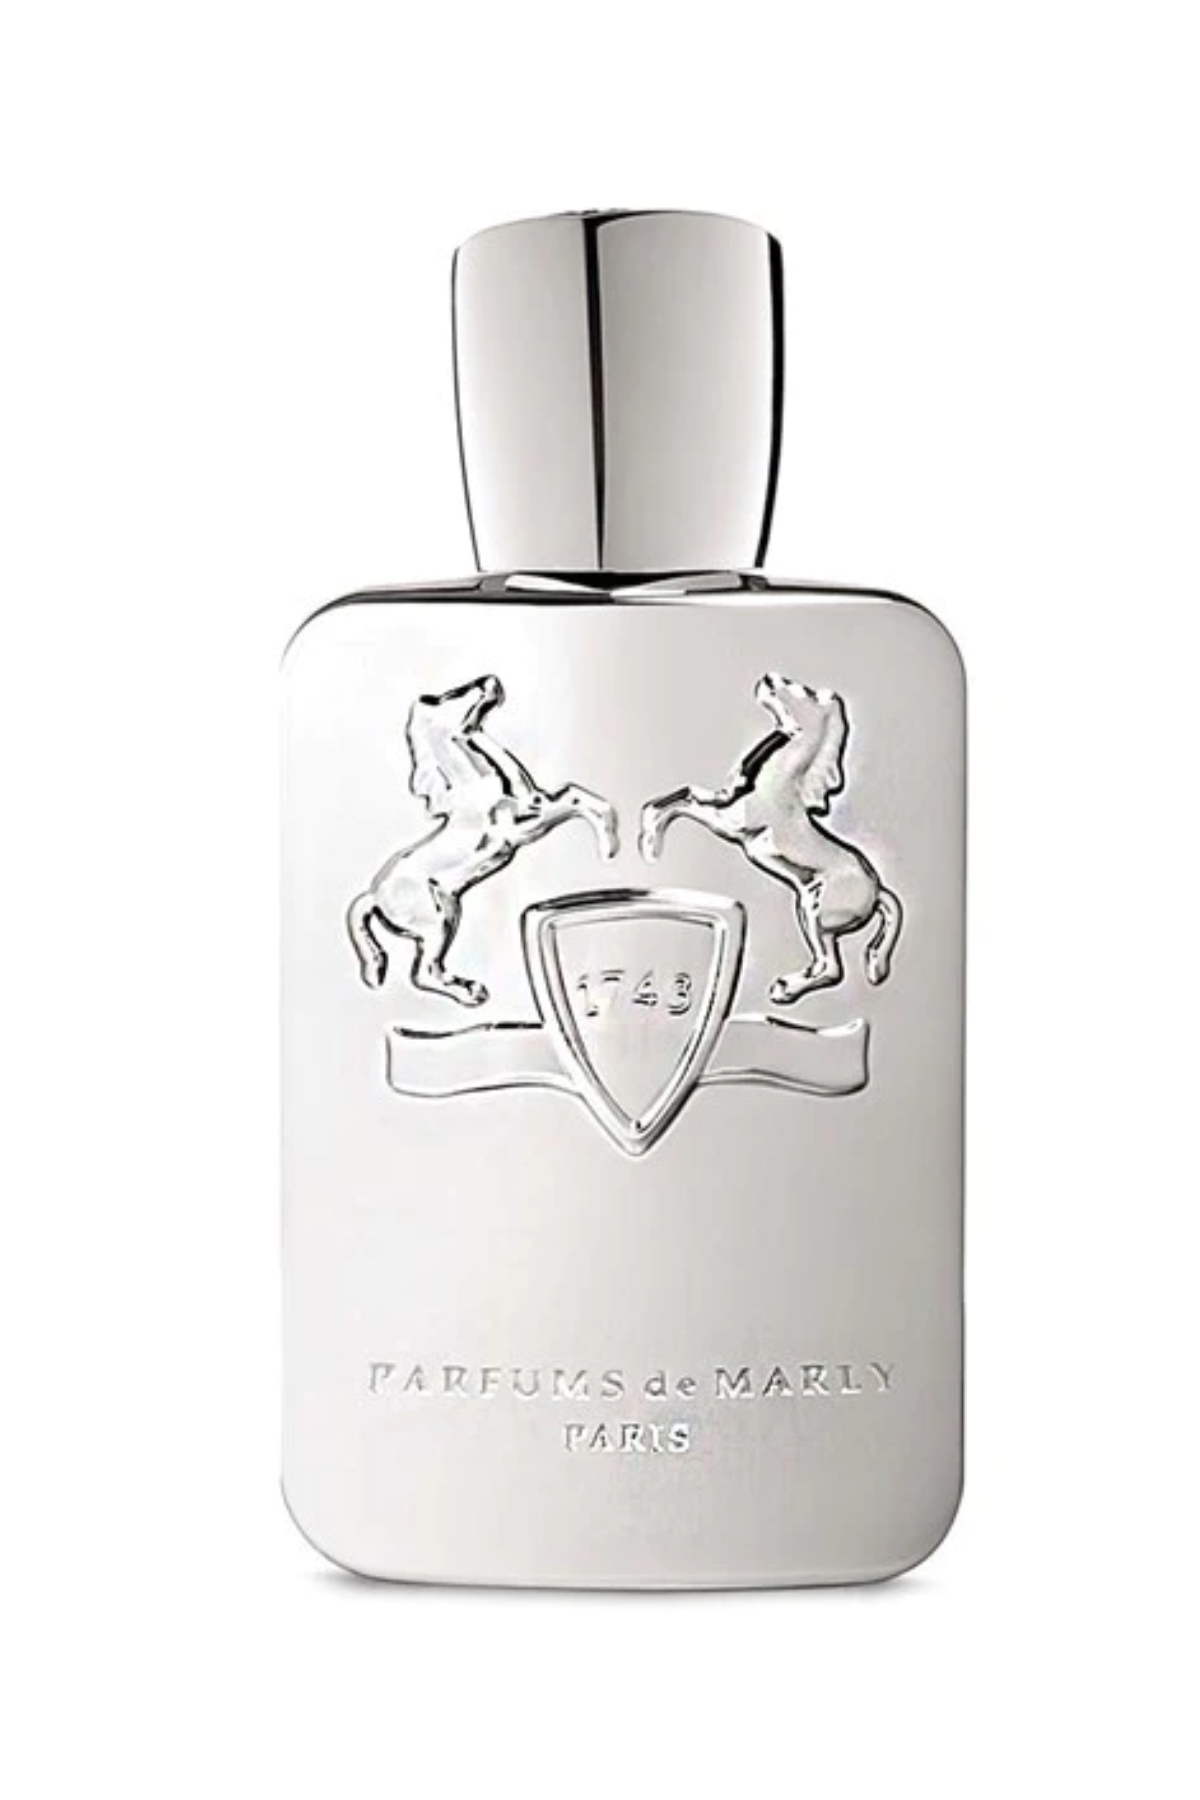 A bottle of Parfums de Marly Pegasus Perfume against a white background.